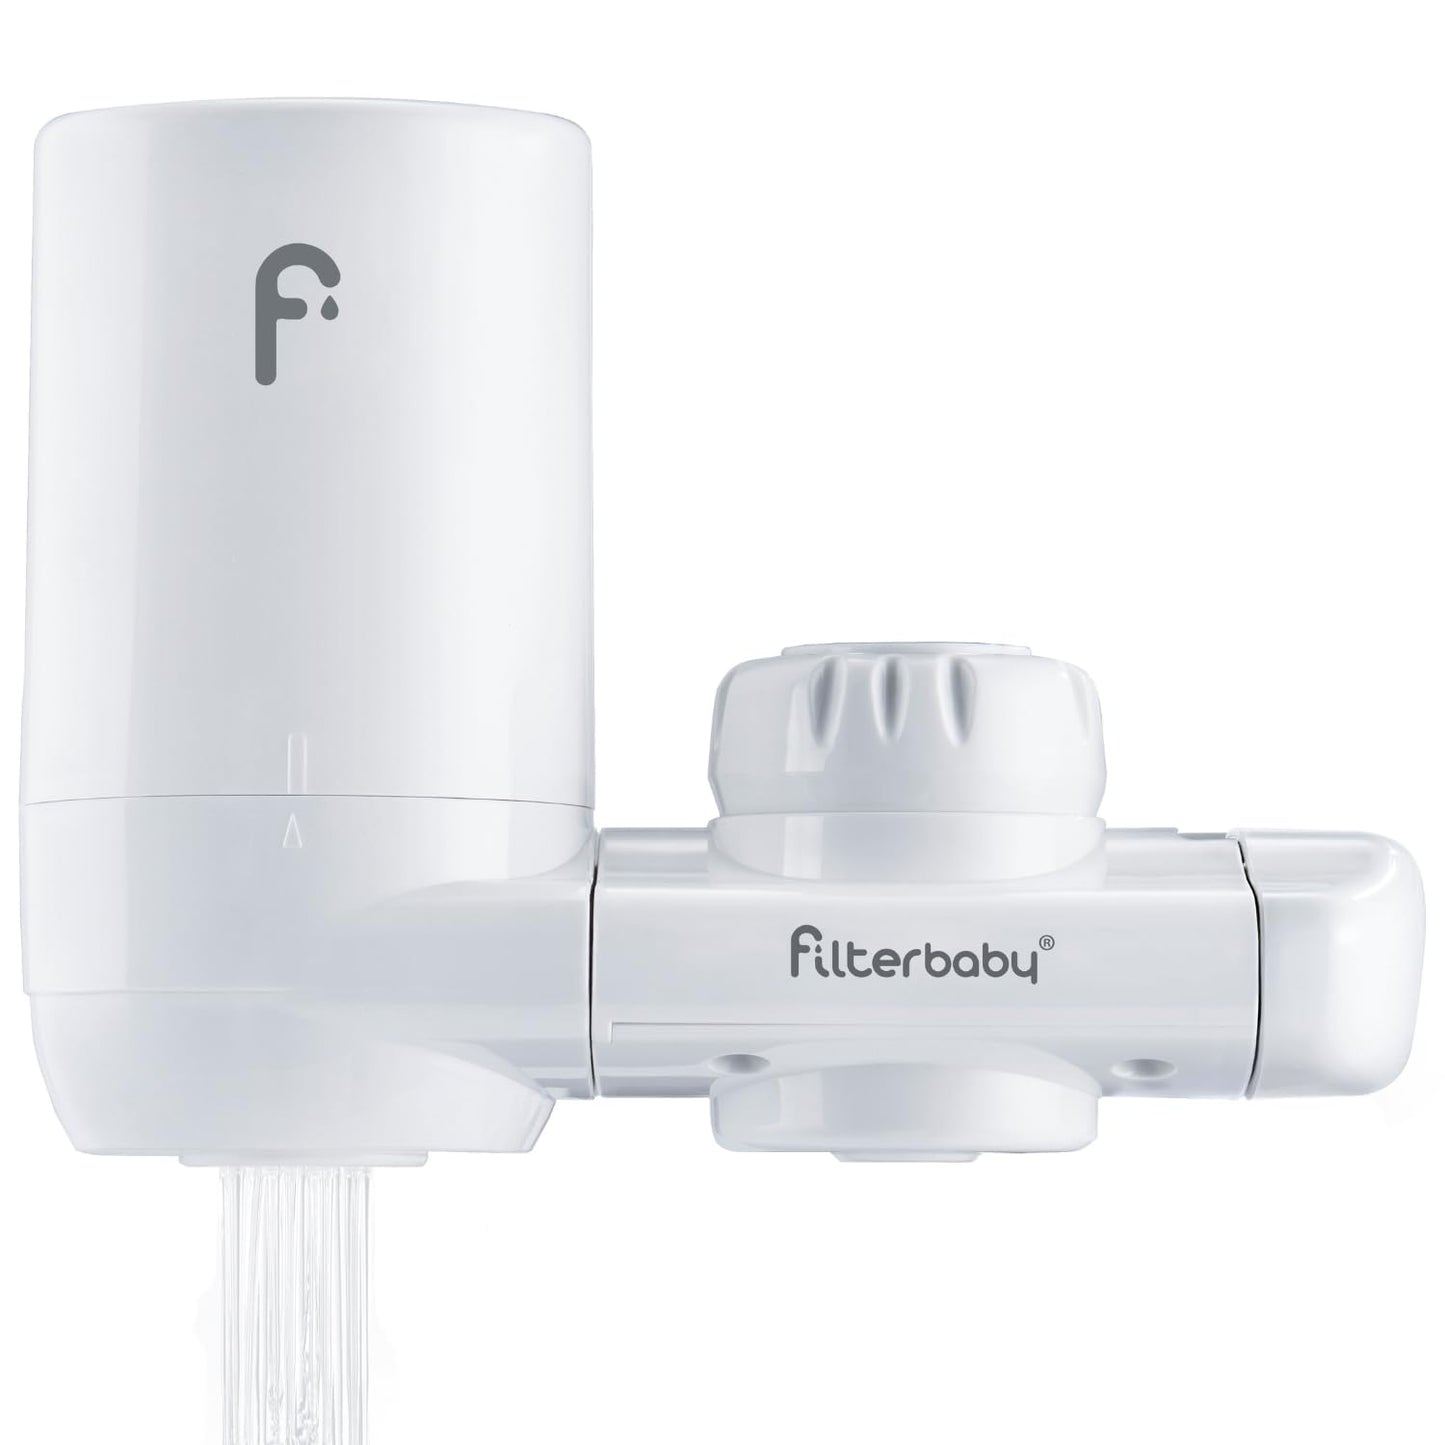 Filterbaby Faucet-Mounted Water Filter for Skin Care